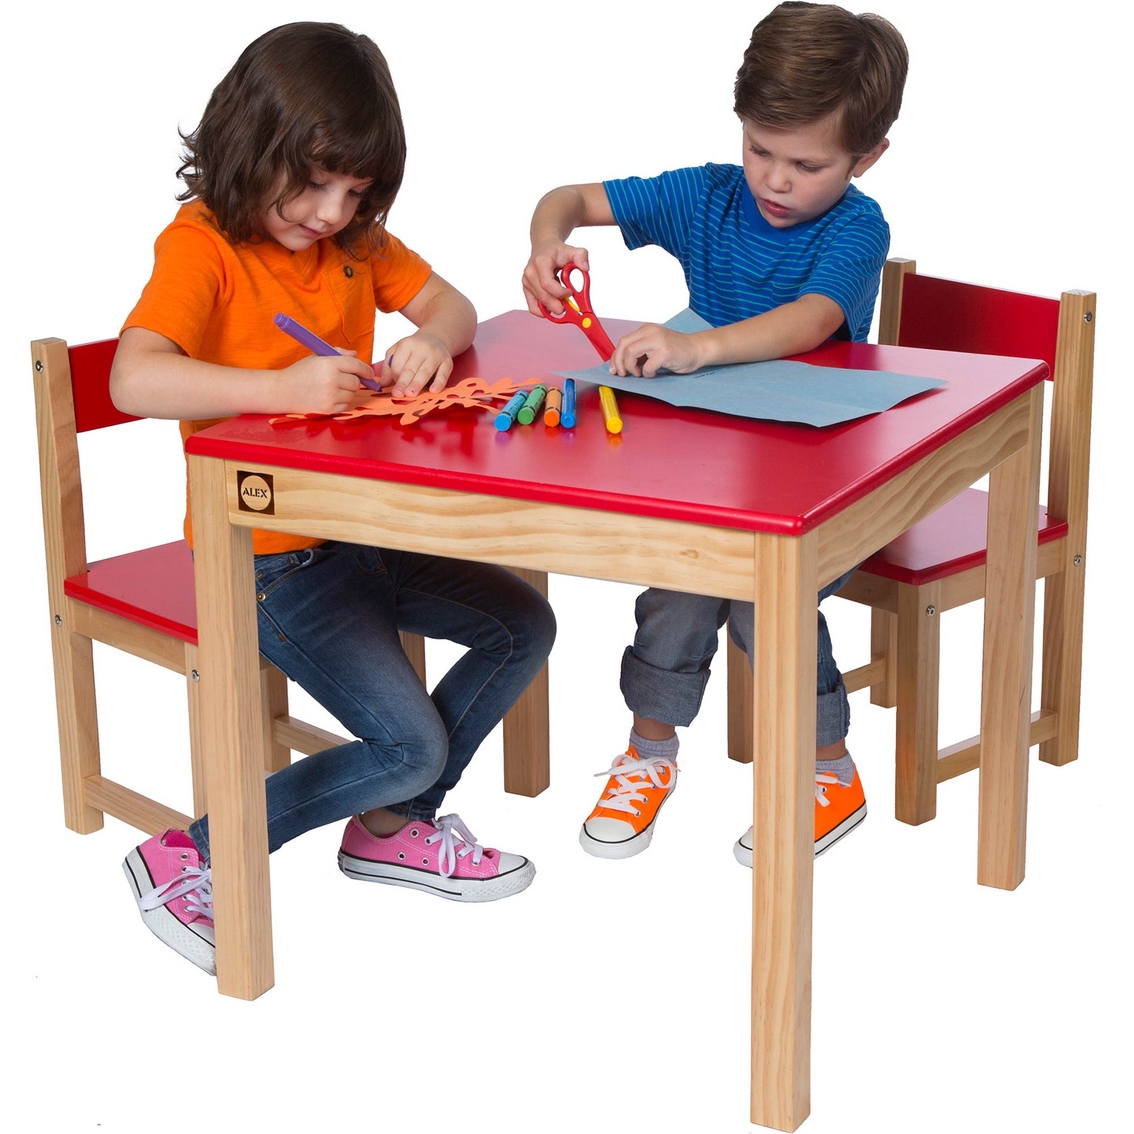 ALEX Toys Artist Studio Wooden Table and Chair Set, Red - Image 2 of 2